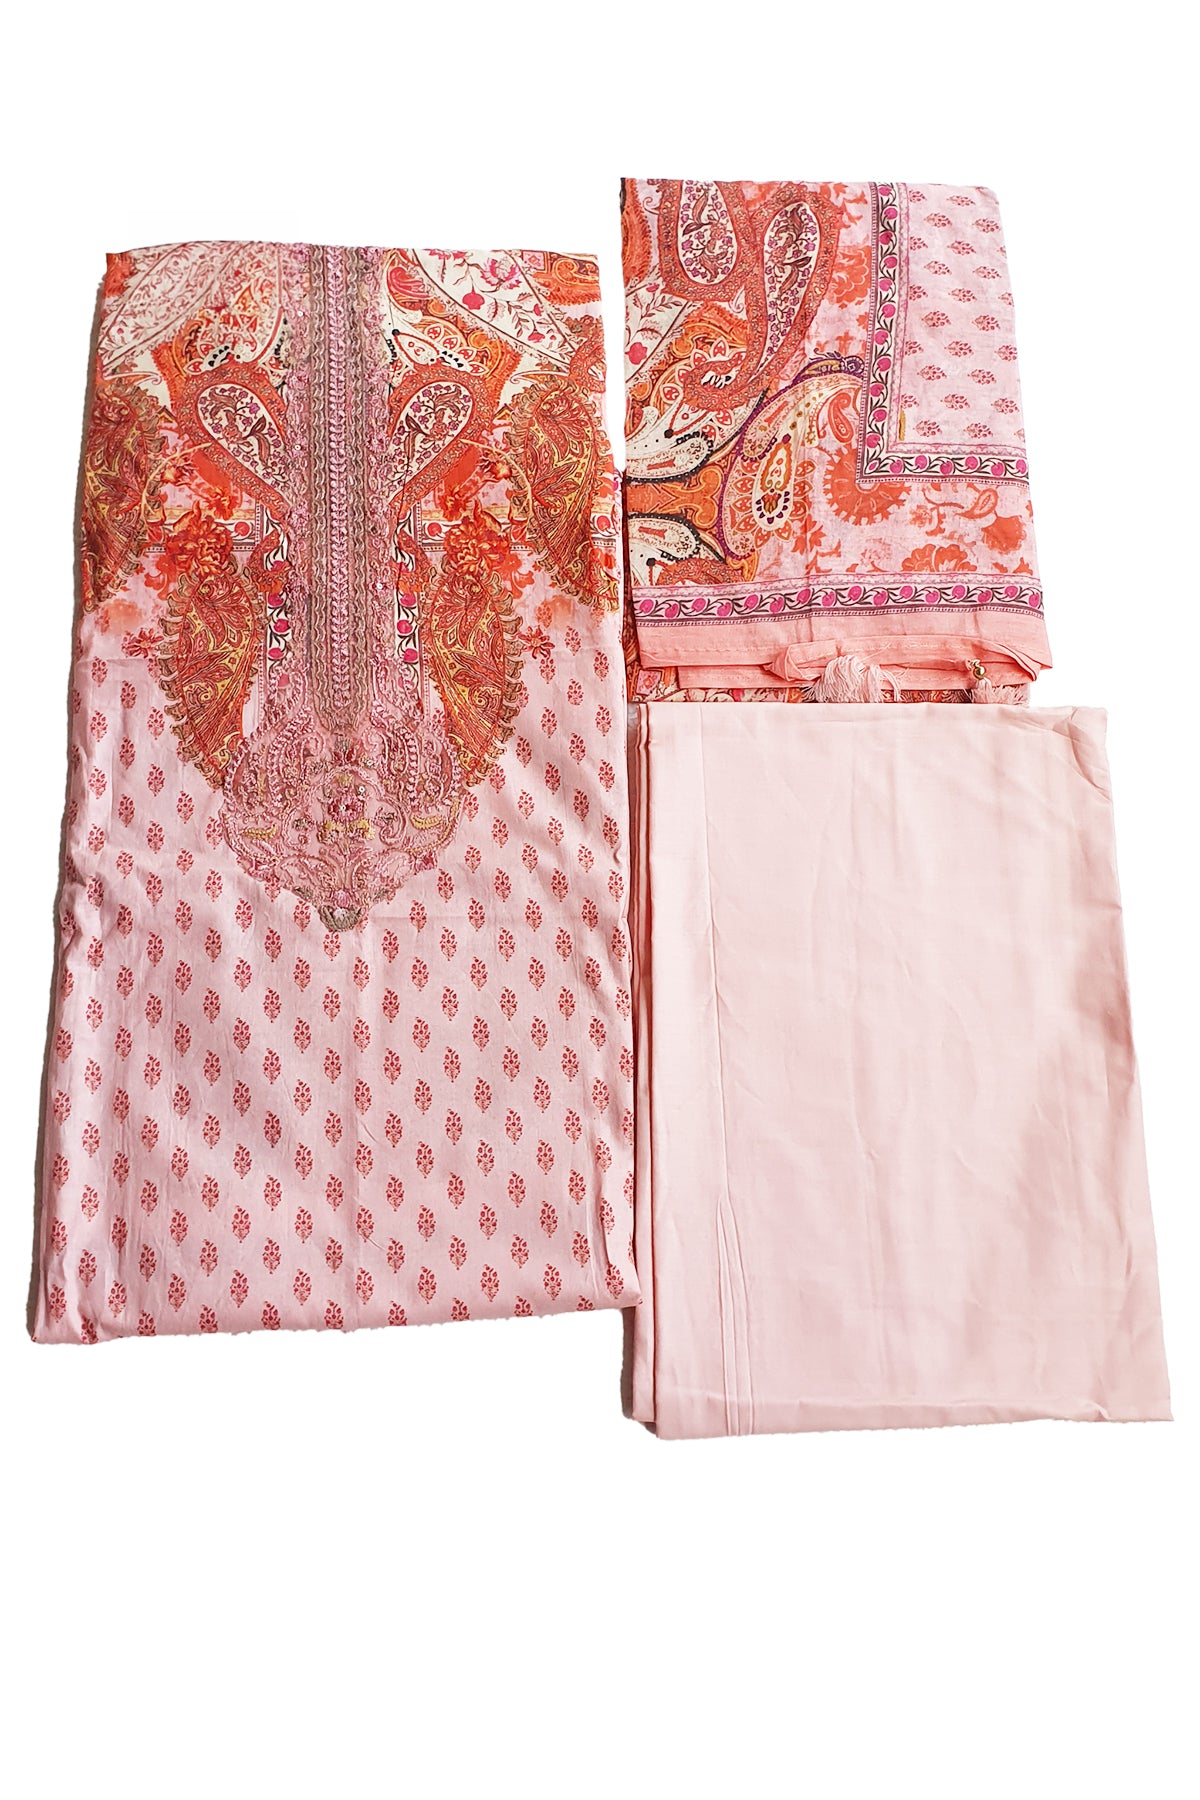 Pink Printed Cotton Resham Embroidered Unstitched Suit